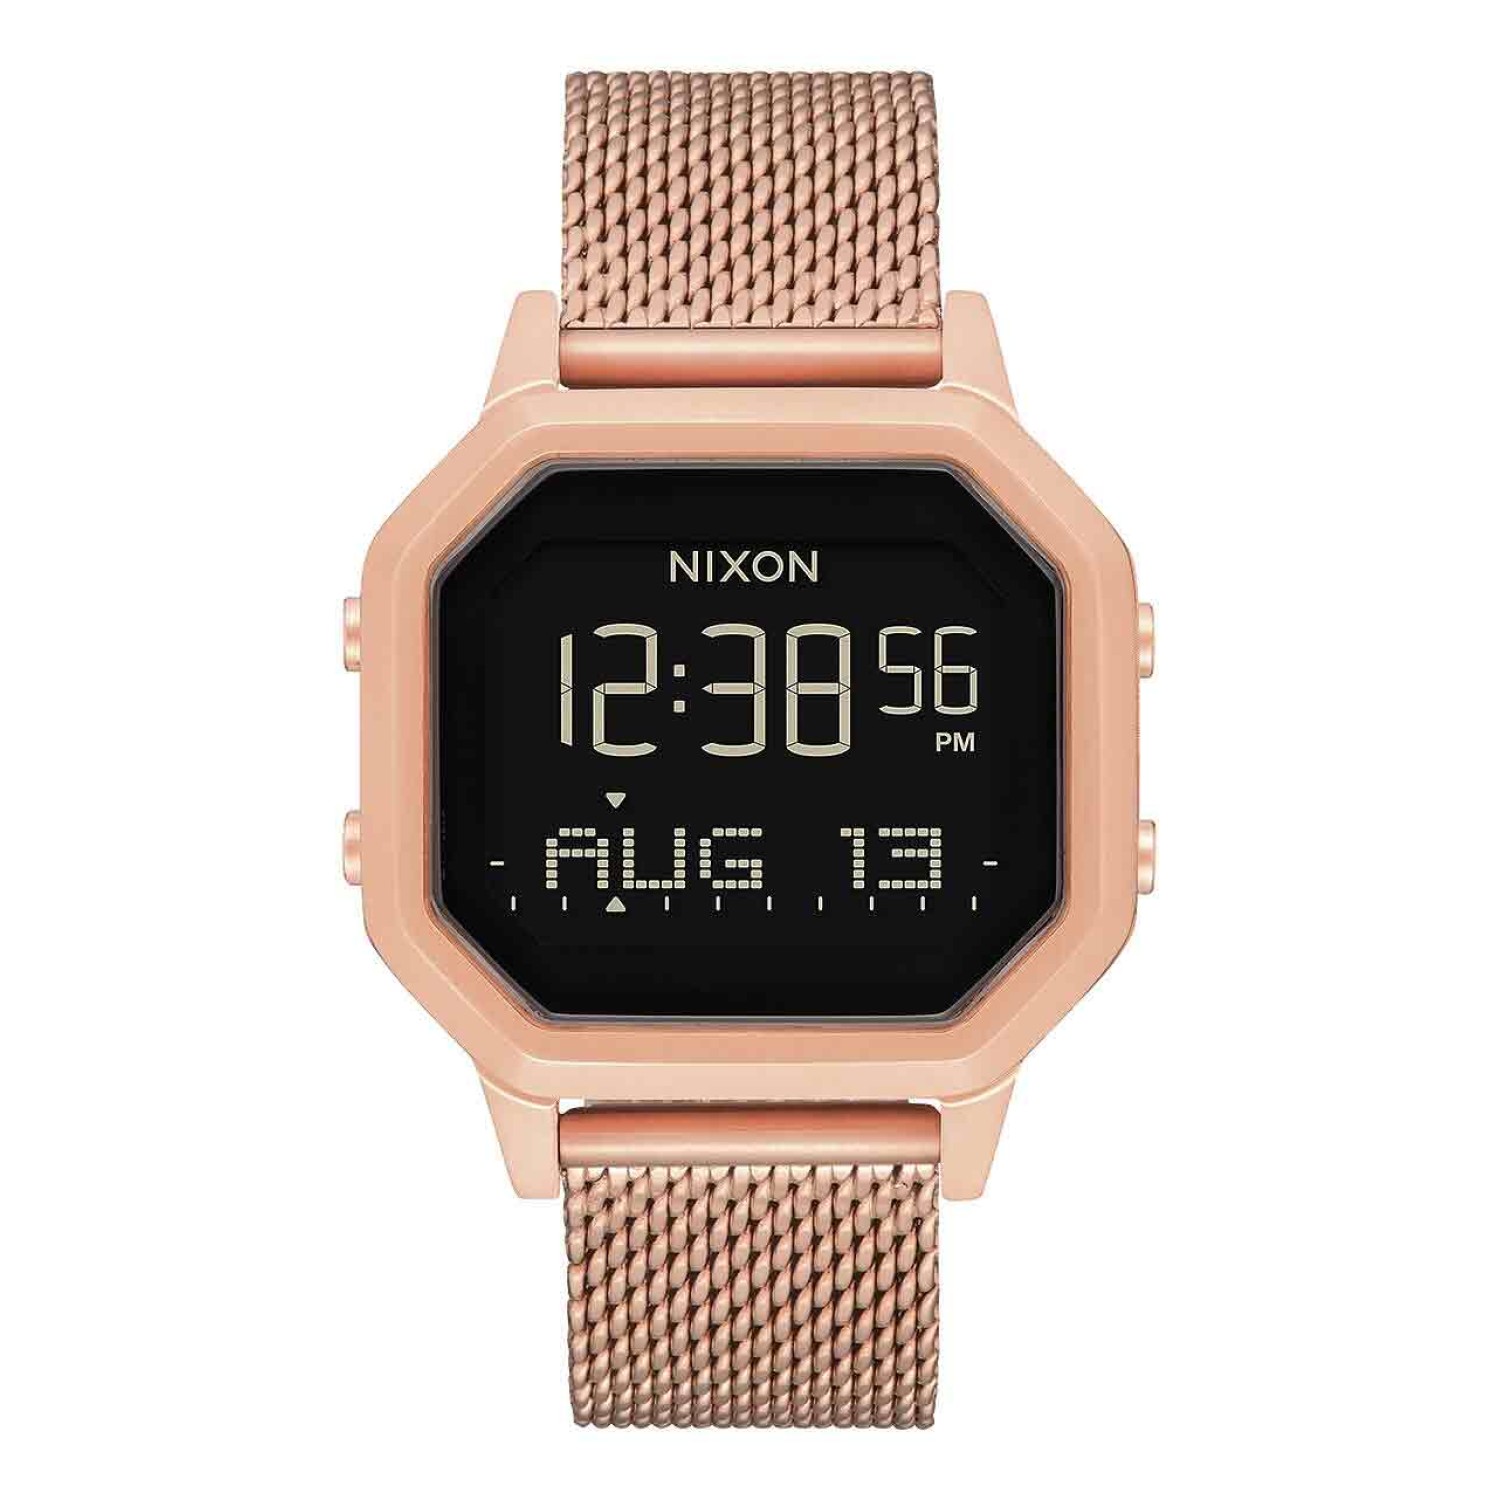 A1272-897-00 NIXON Siren Milanese All Rose Gold Watch. For those who can still hear the call of the ocean no matter how far away. The Siren Milanese is a composition take our bestselling womens tide watch with a glam band.You don’t have to sacrifice comfo